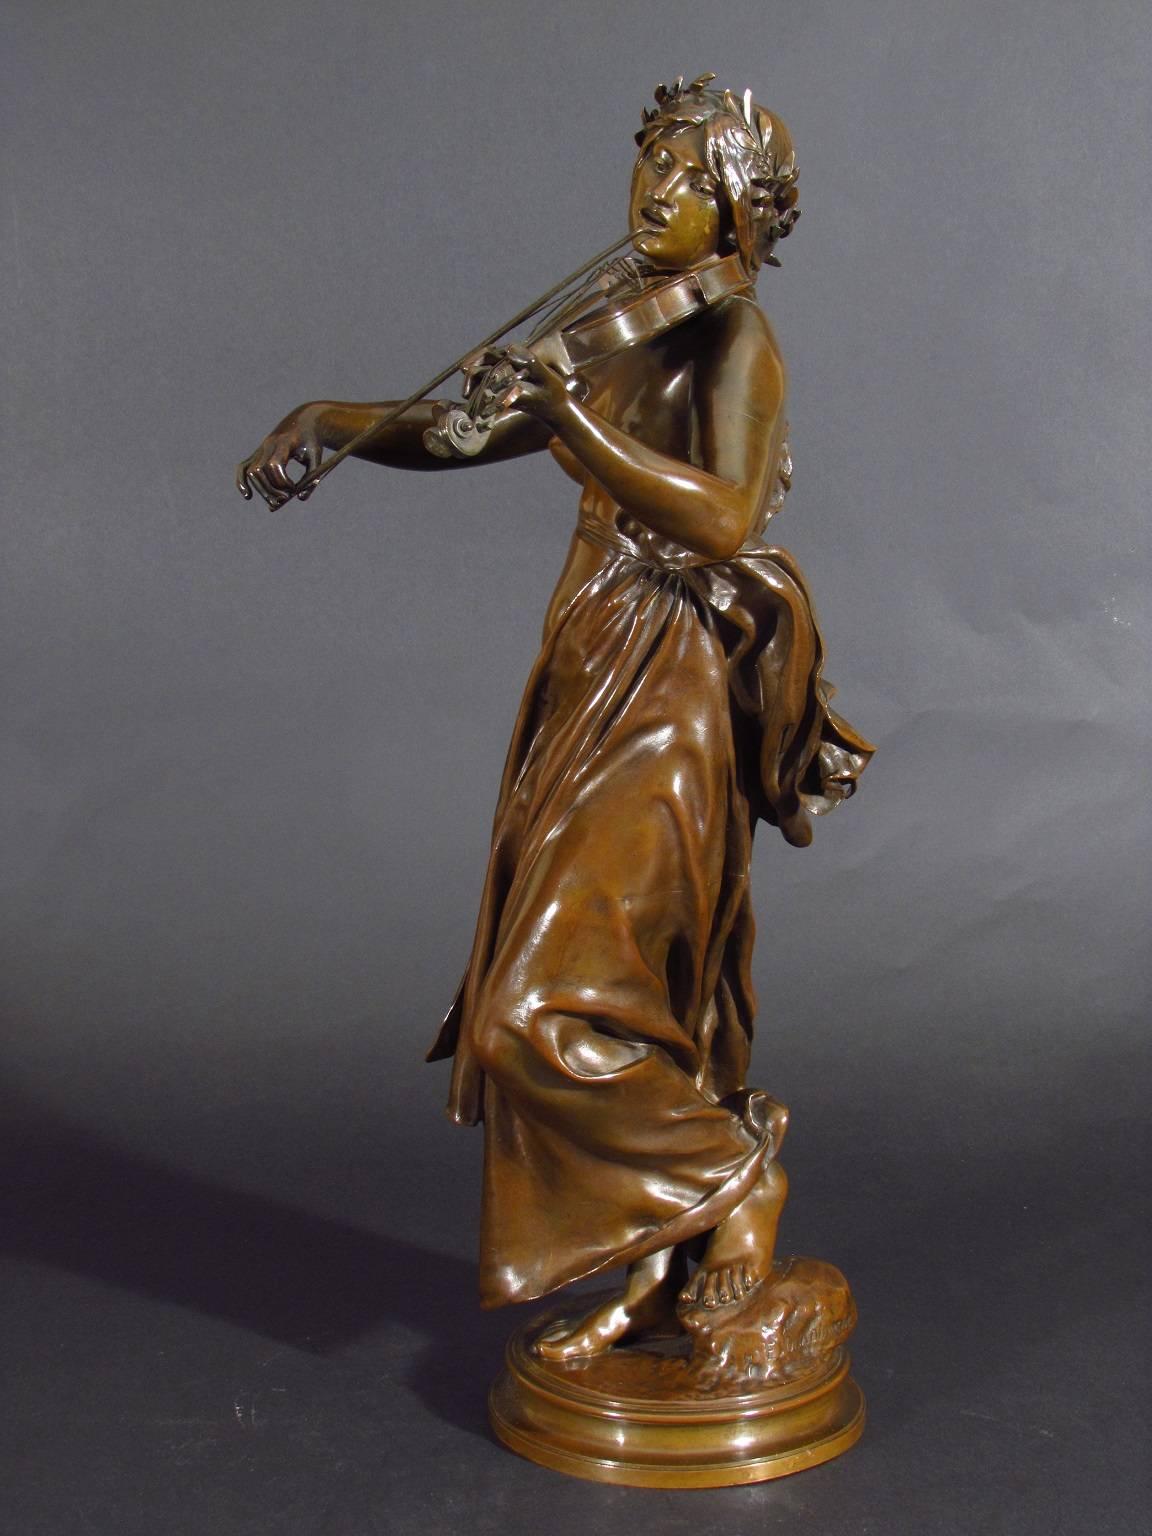 Antique bronze sculpture 'La Musique' by Eugene Delaplanche depicting a young woman playing a viola.
Signed: E. Delaplanche    Foundry: F. Barbedienne, Fondeur, Paris.  Collas seal.
This sculpture was first exhibited in plaster at the Salon of